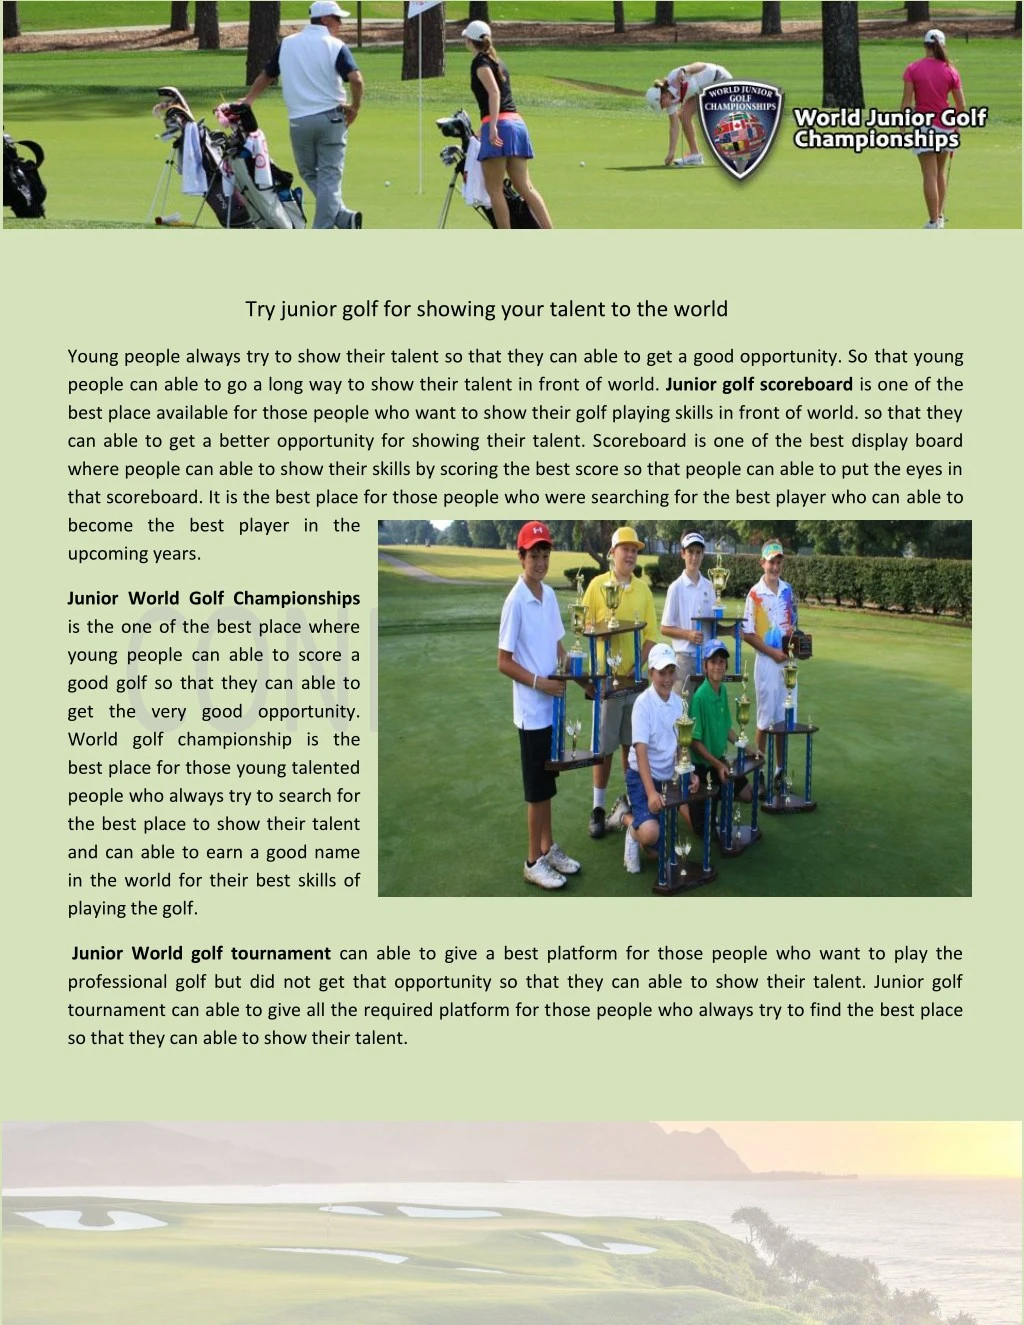 try junior golf for showing your talent